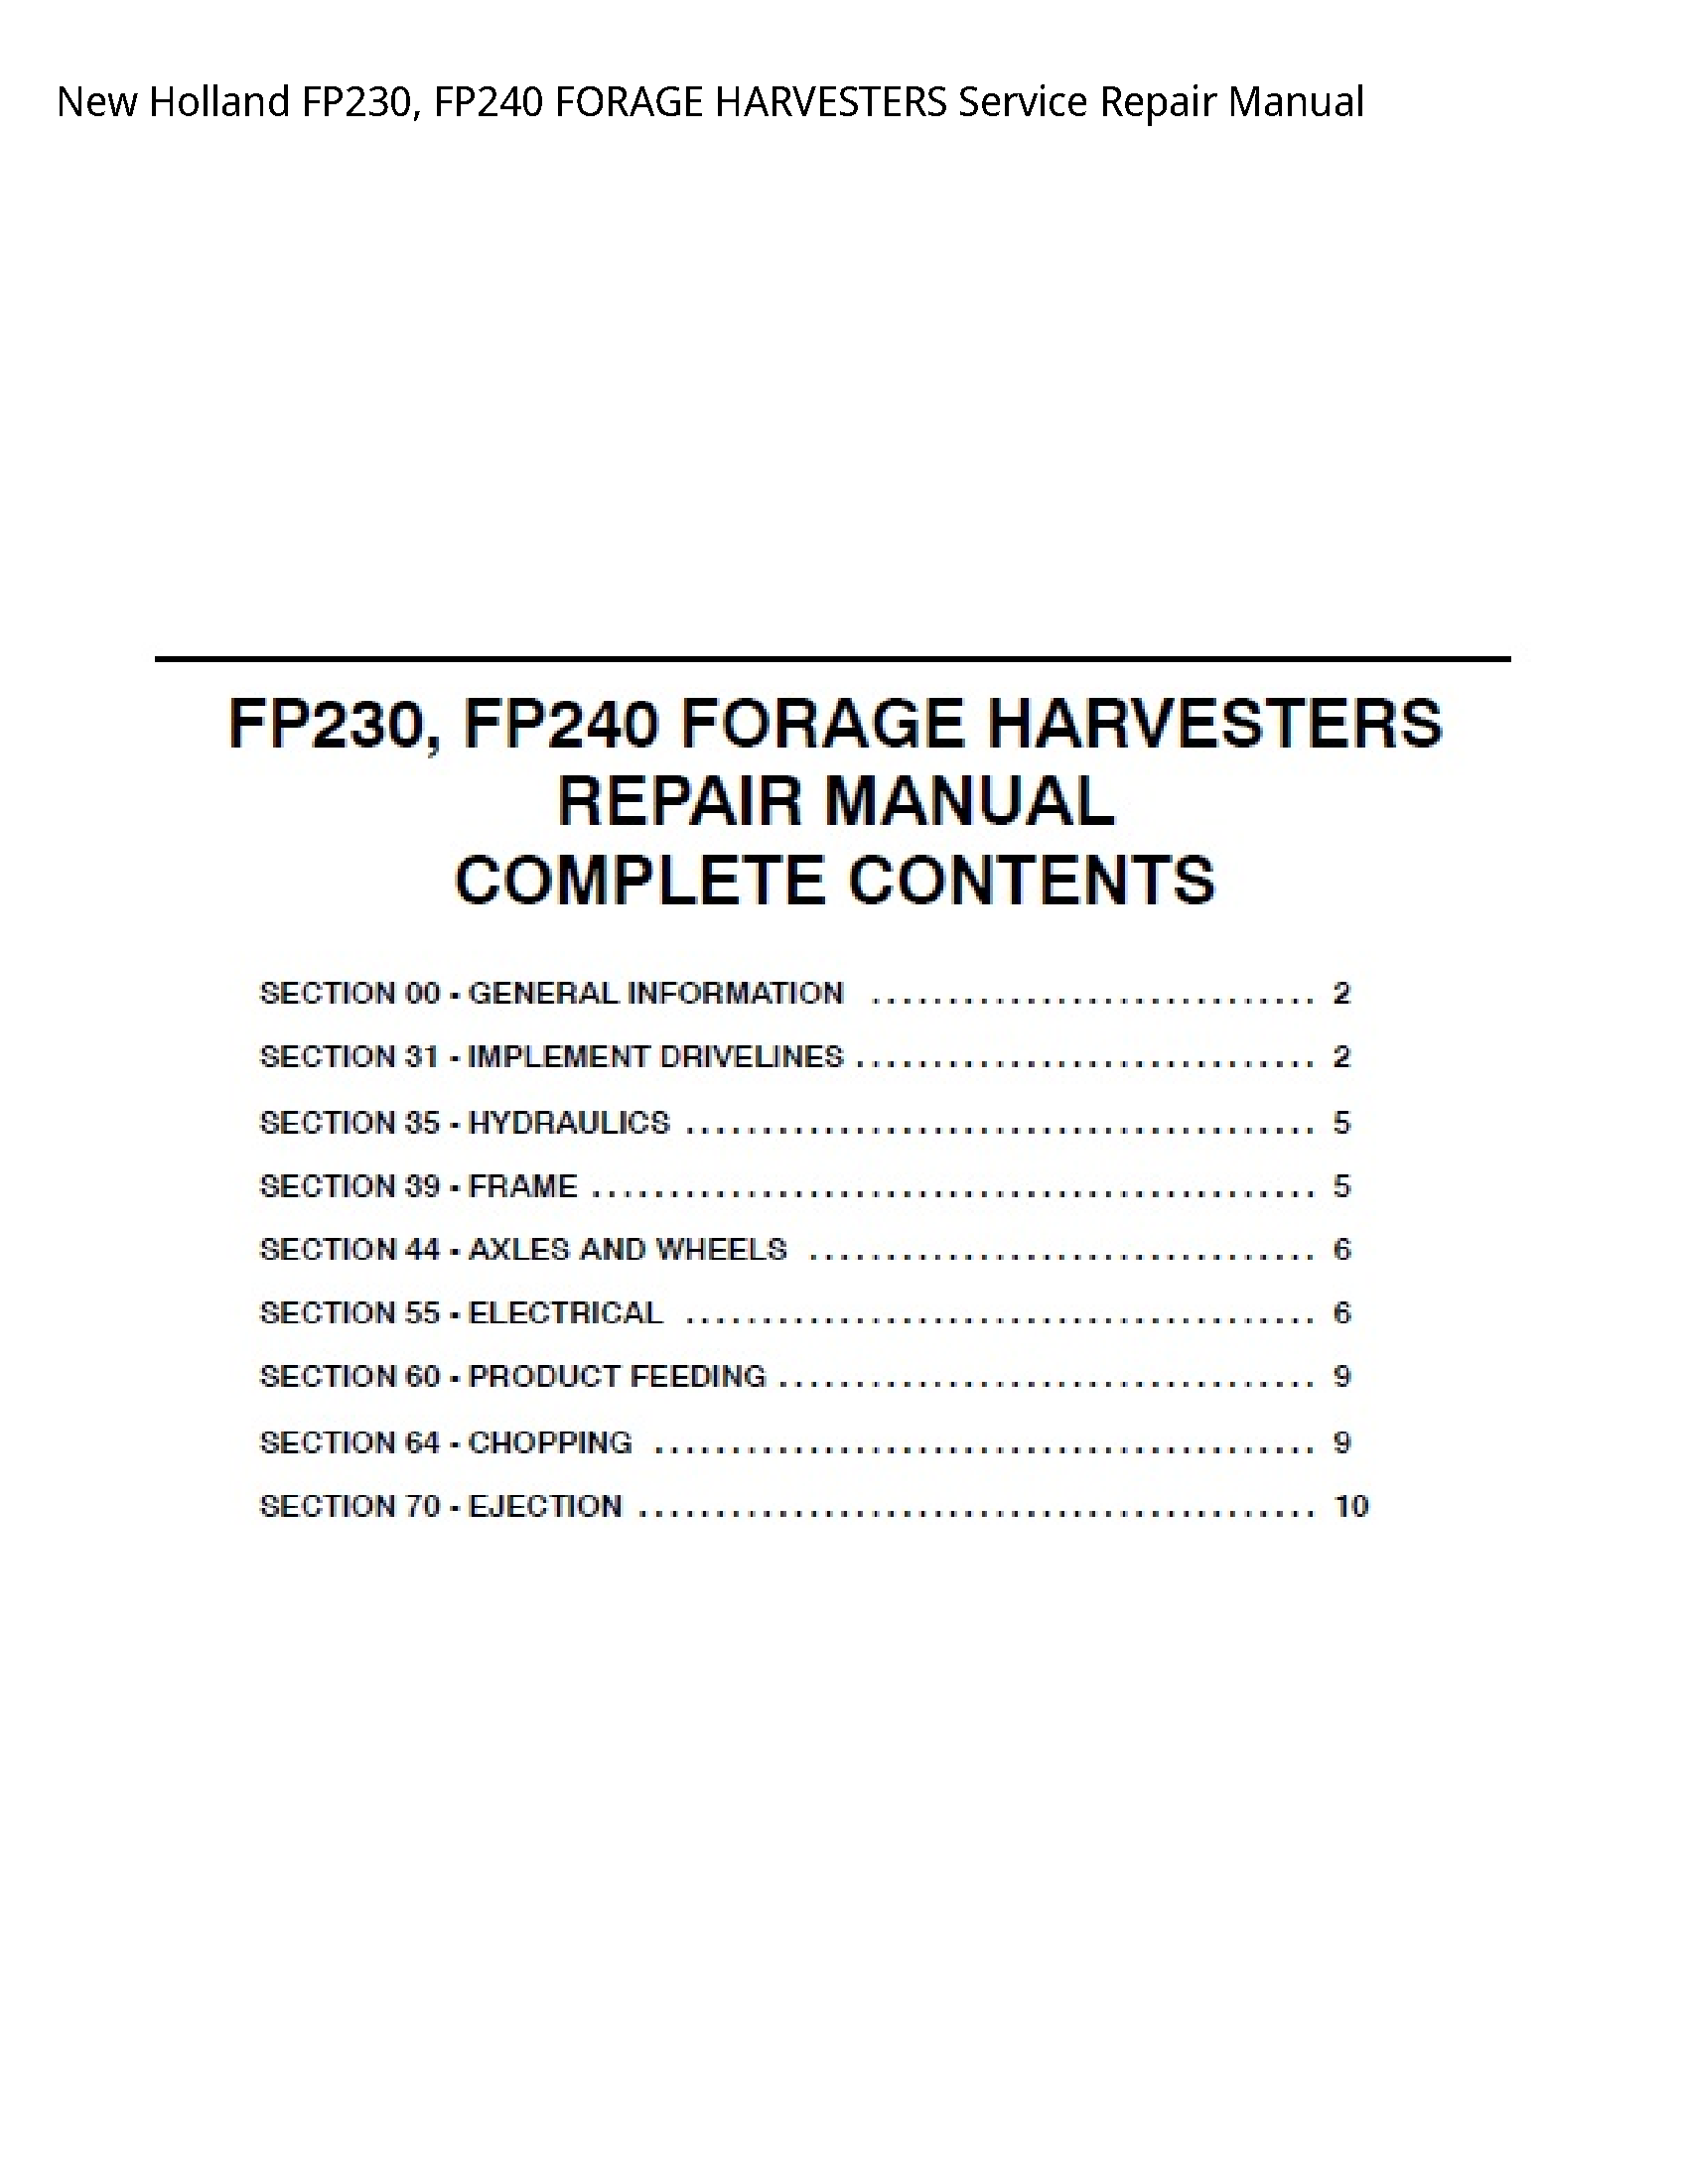 New Holland FP230 FORAGE HARVESTERS manual